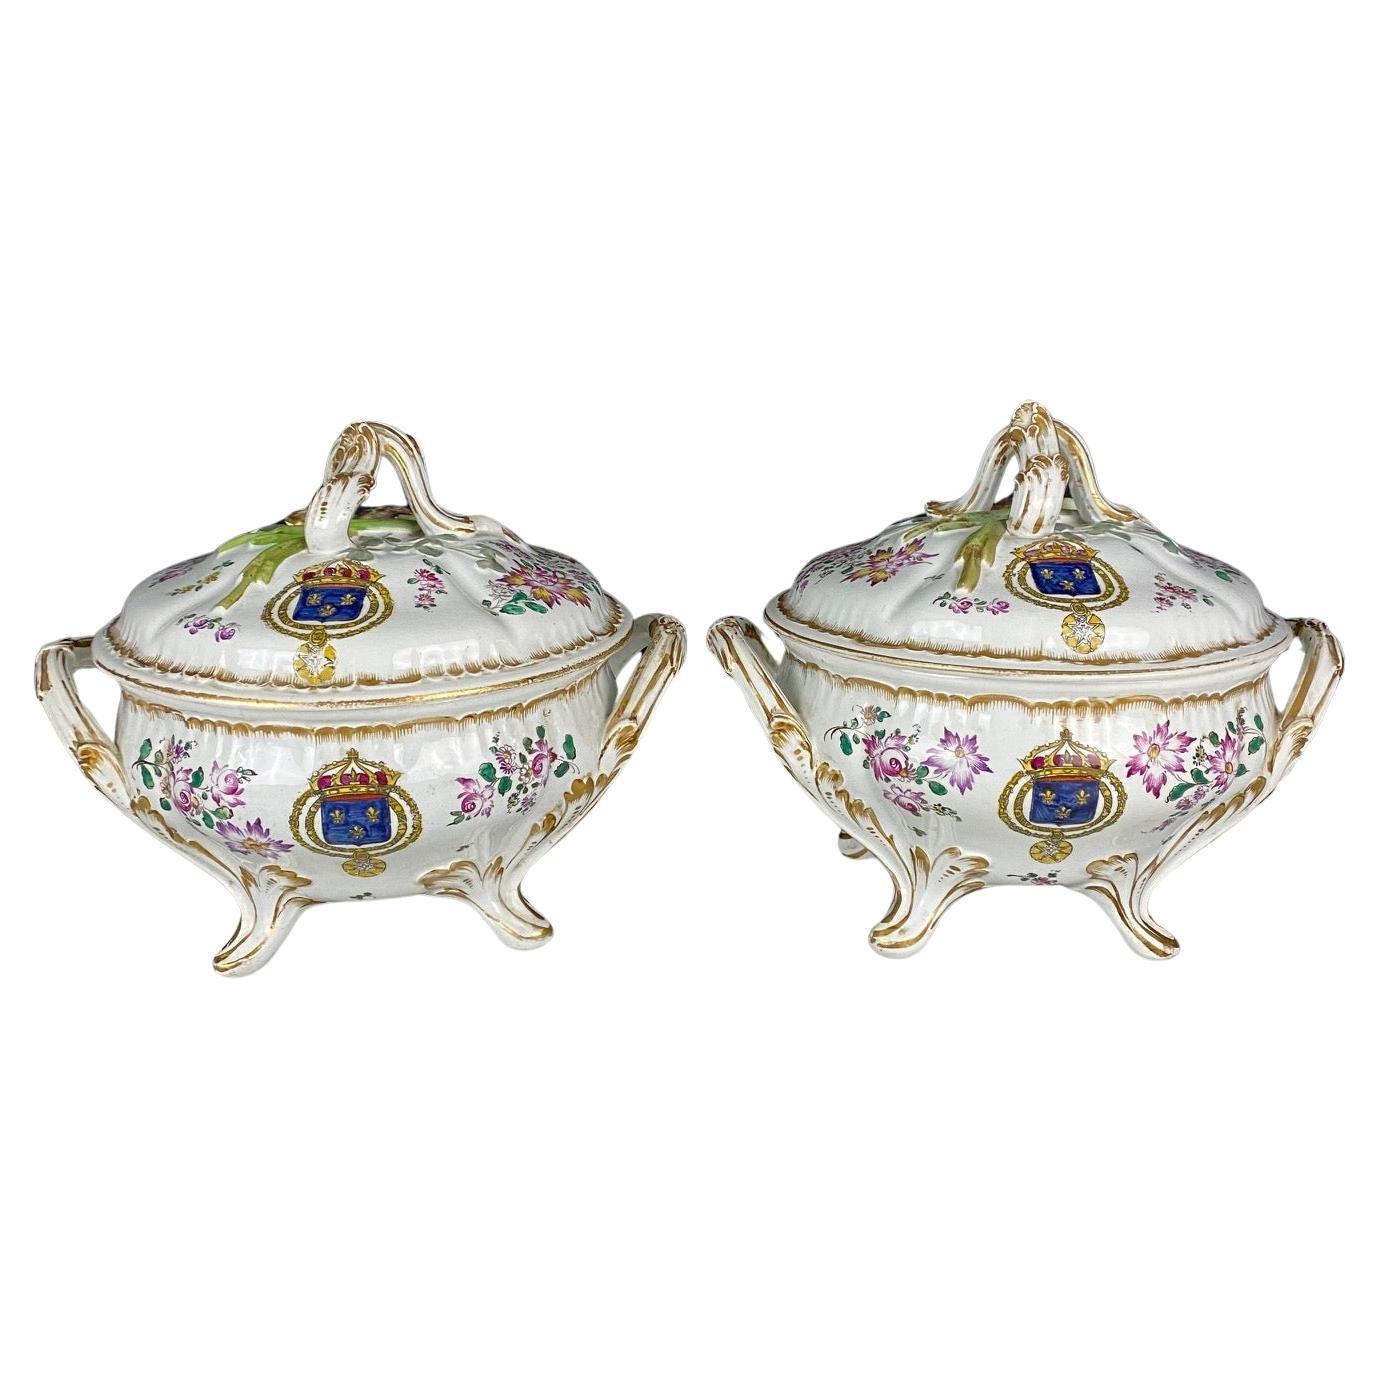 Pair French Hand Painted Faience Porcelain Soup Tureens with Coats of Arms For Sale